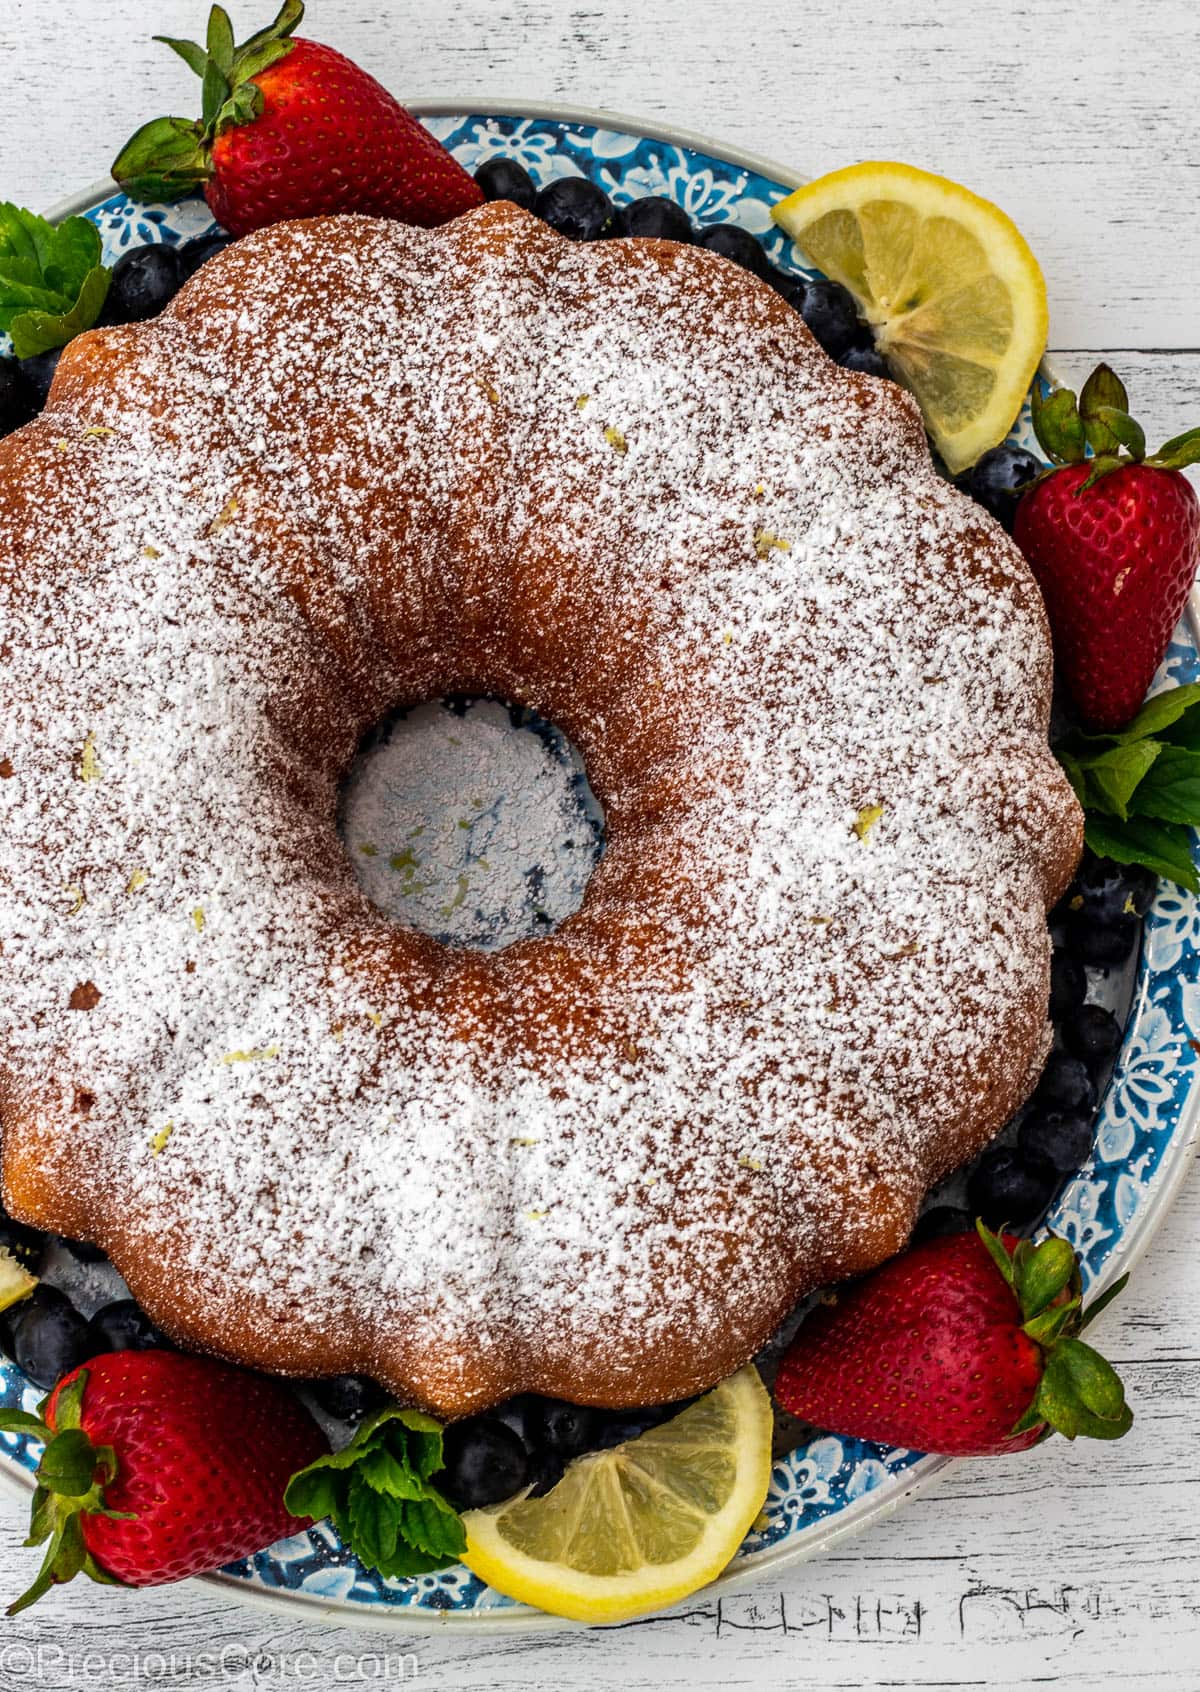 A bundt cake dusted with powdered sugar and surrounded by berries.